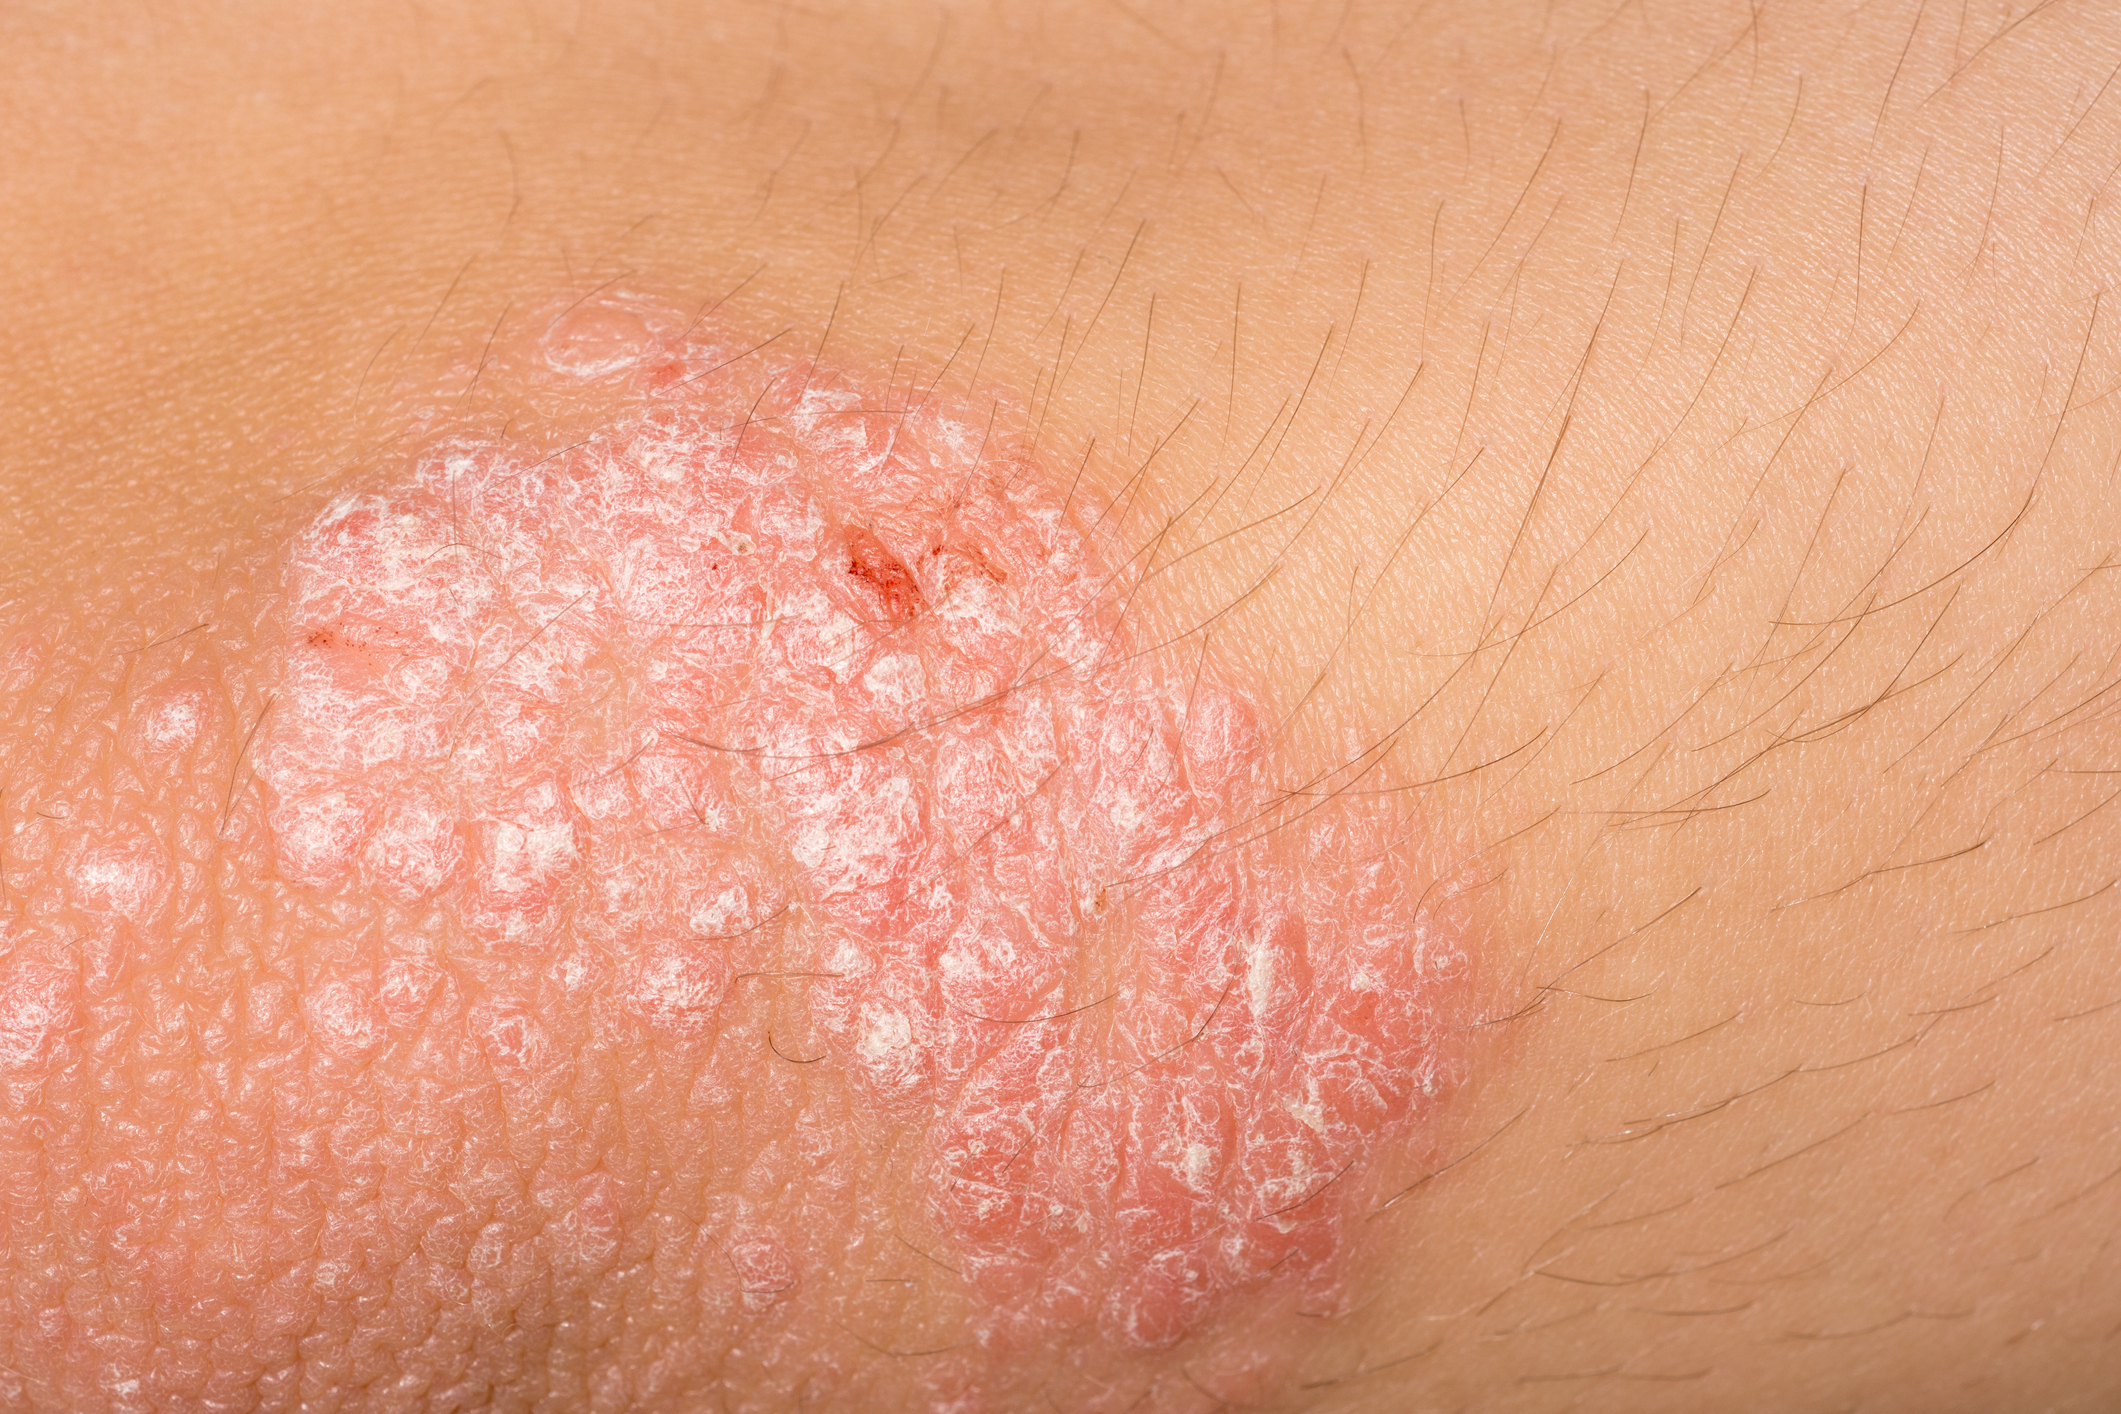 does plaque psoriasis get worse with age)